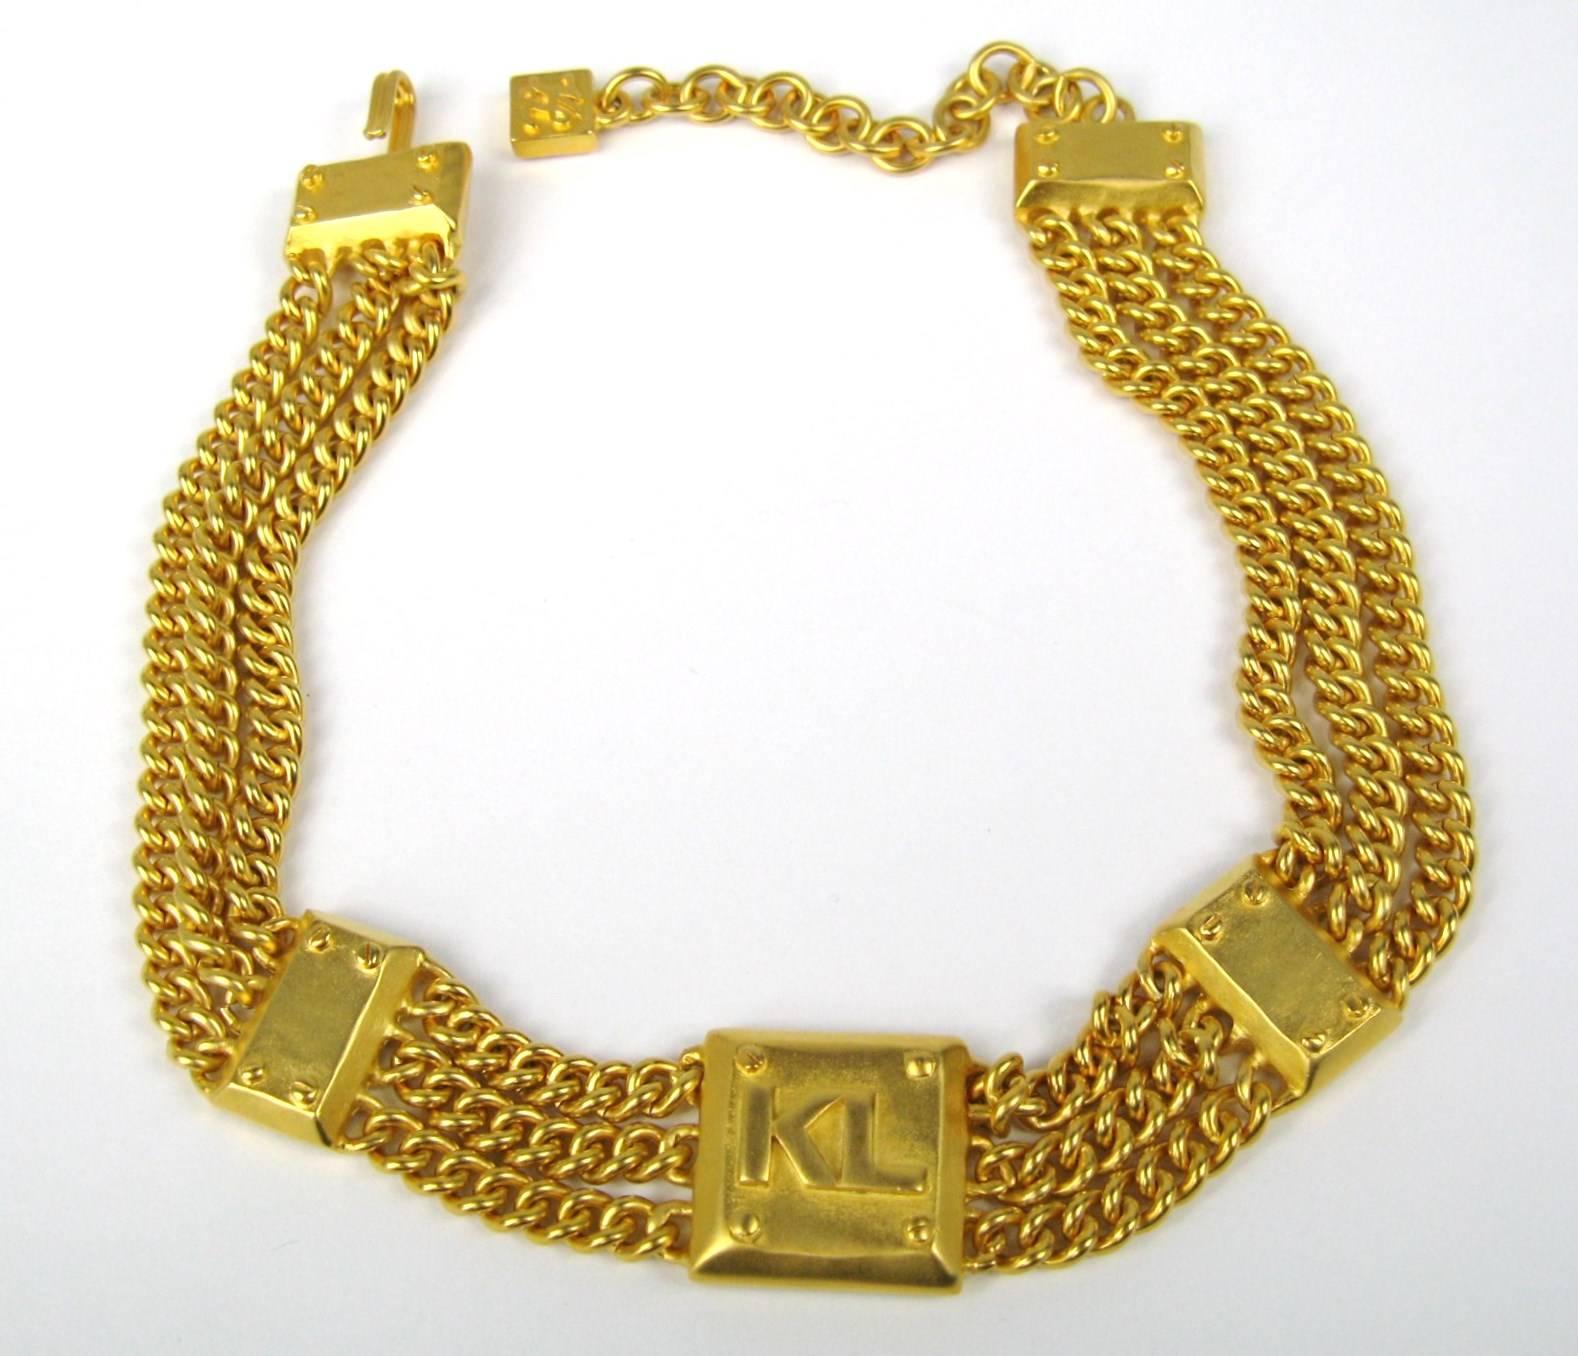 Another Karl New, Never worn 3 curb link attached to the main Karl Lagerfeld logo in the front. Measures 15.5 in with a 3.5 in of adjustment. Visit our store front for hundreds of designer costume jewelry as well as sterling silver. This is out of a